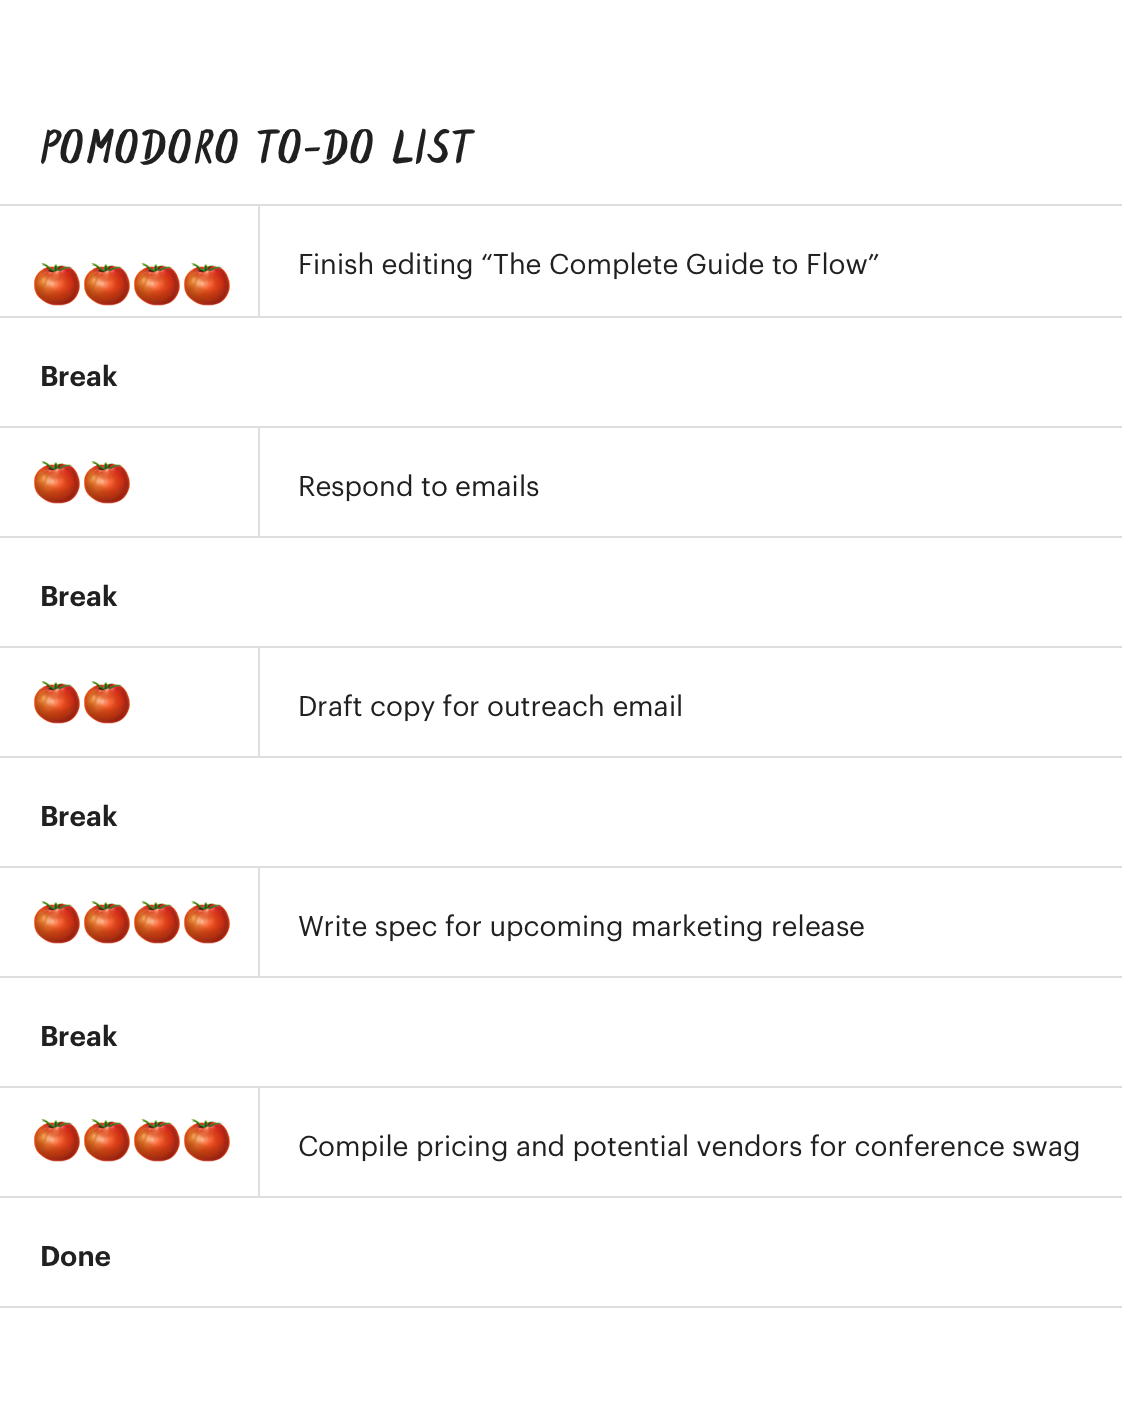 How to plan your day Pomodoro to-do list